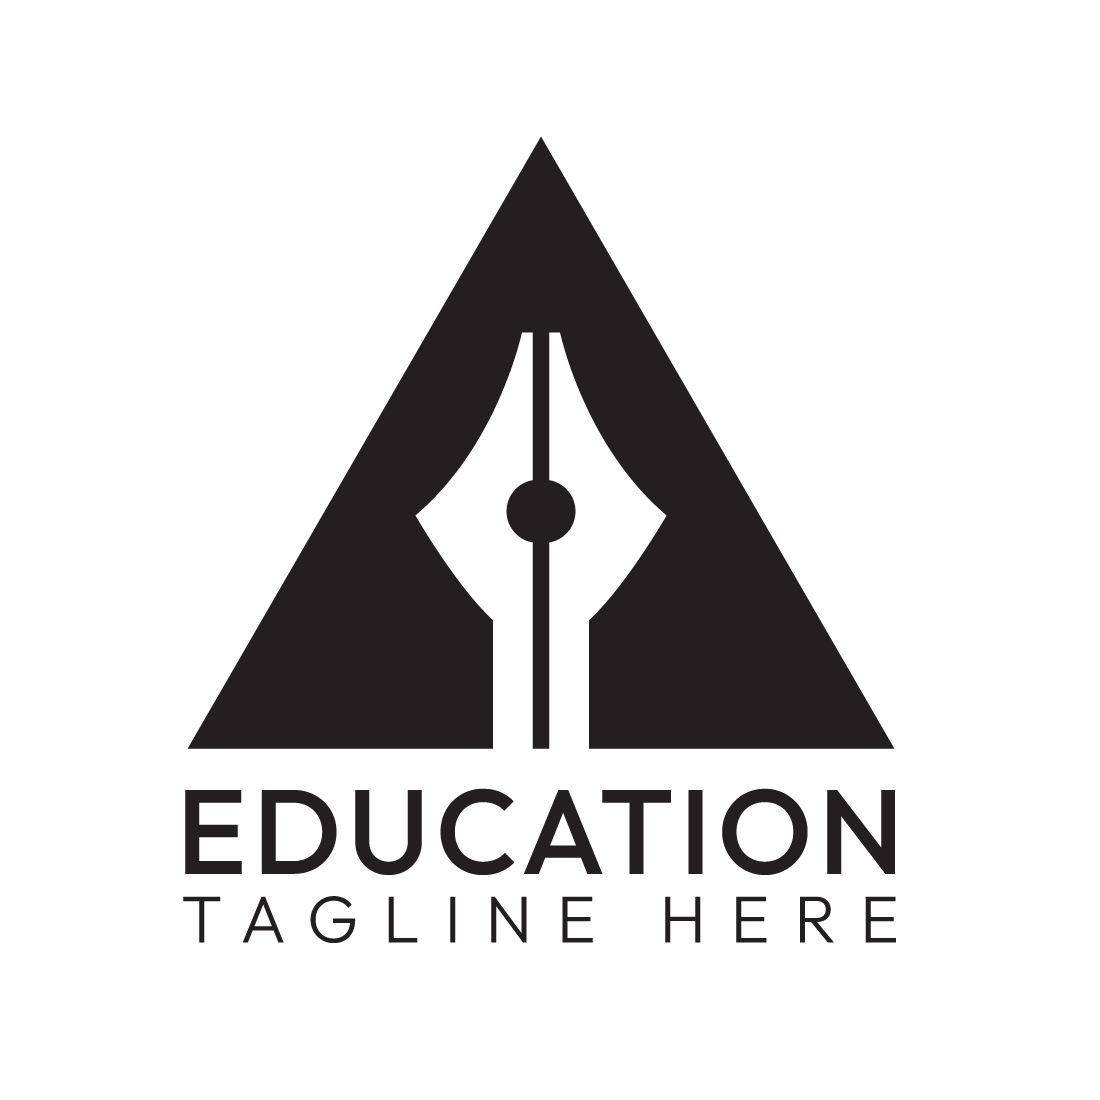 Premium Education, School, and Academy Logo Design Bundle | Master Collection preview image.